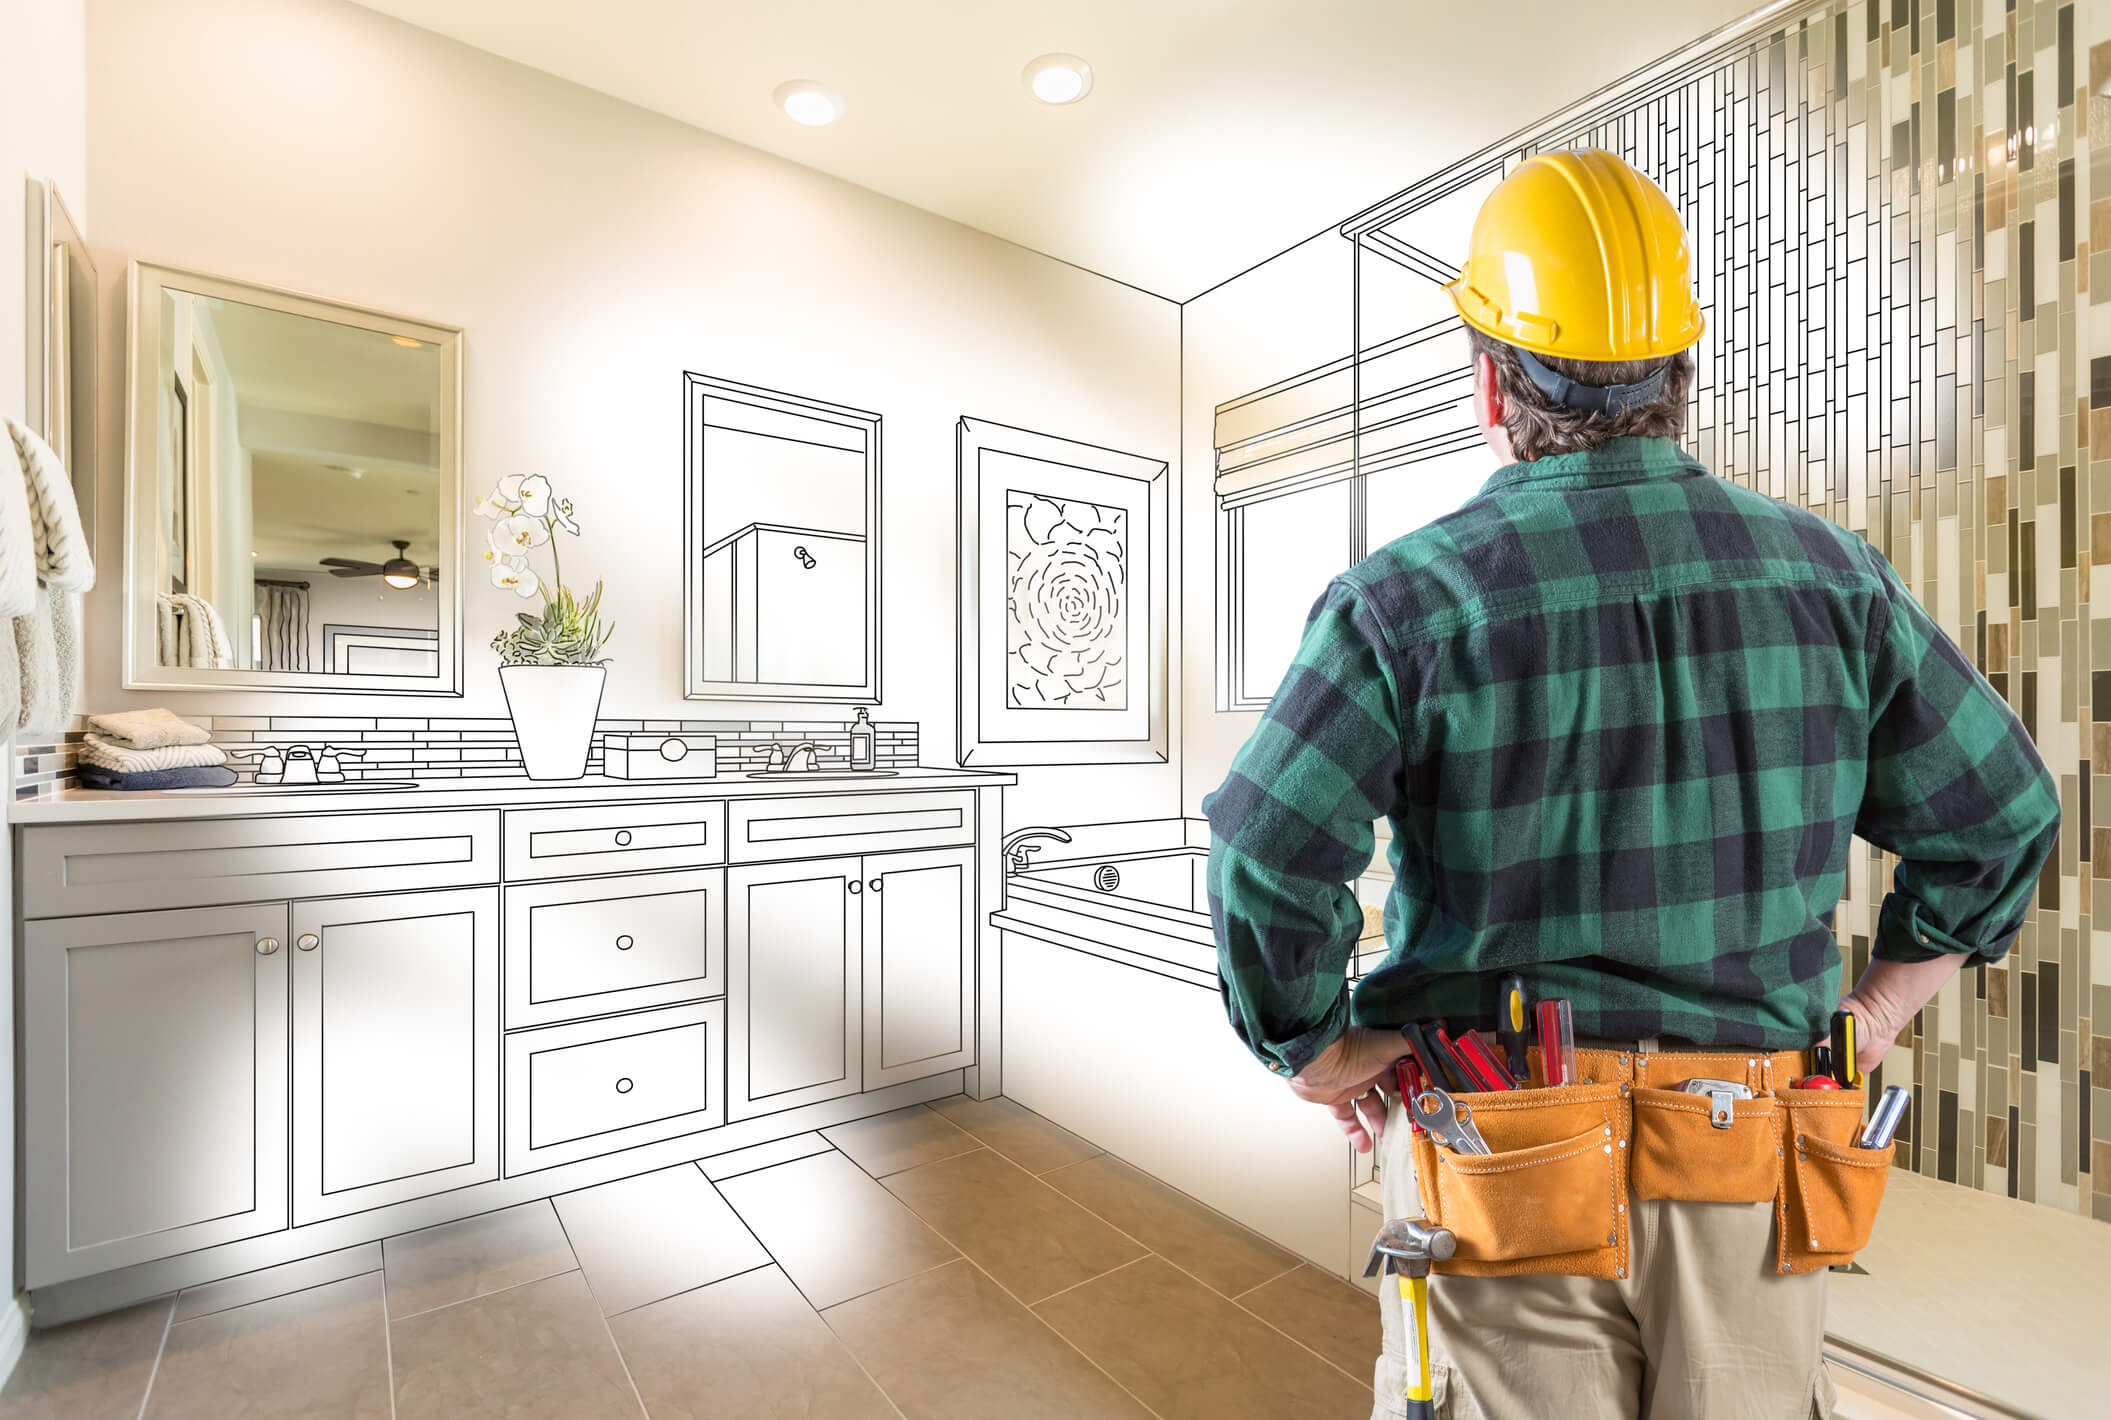 How to Find a Trusted Home Improvement Contractor Near Me